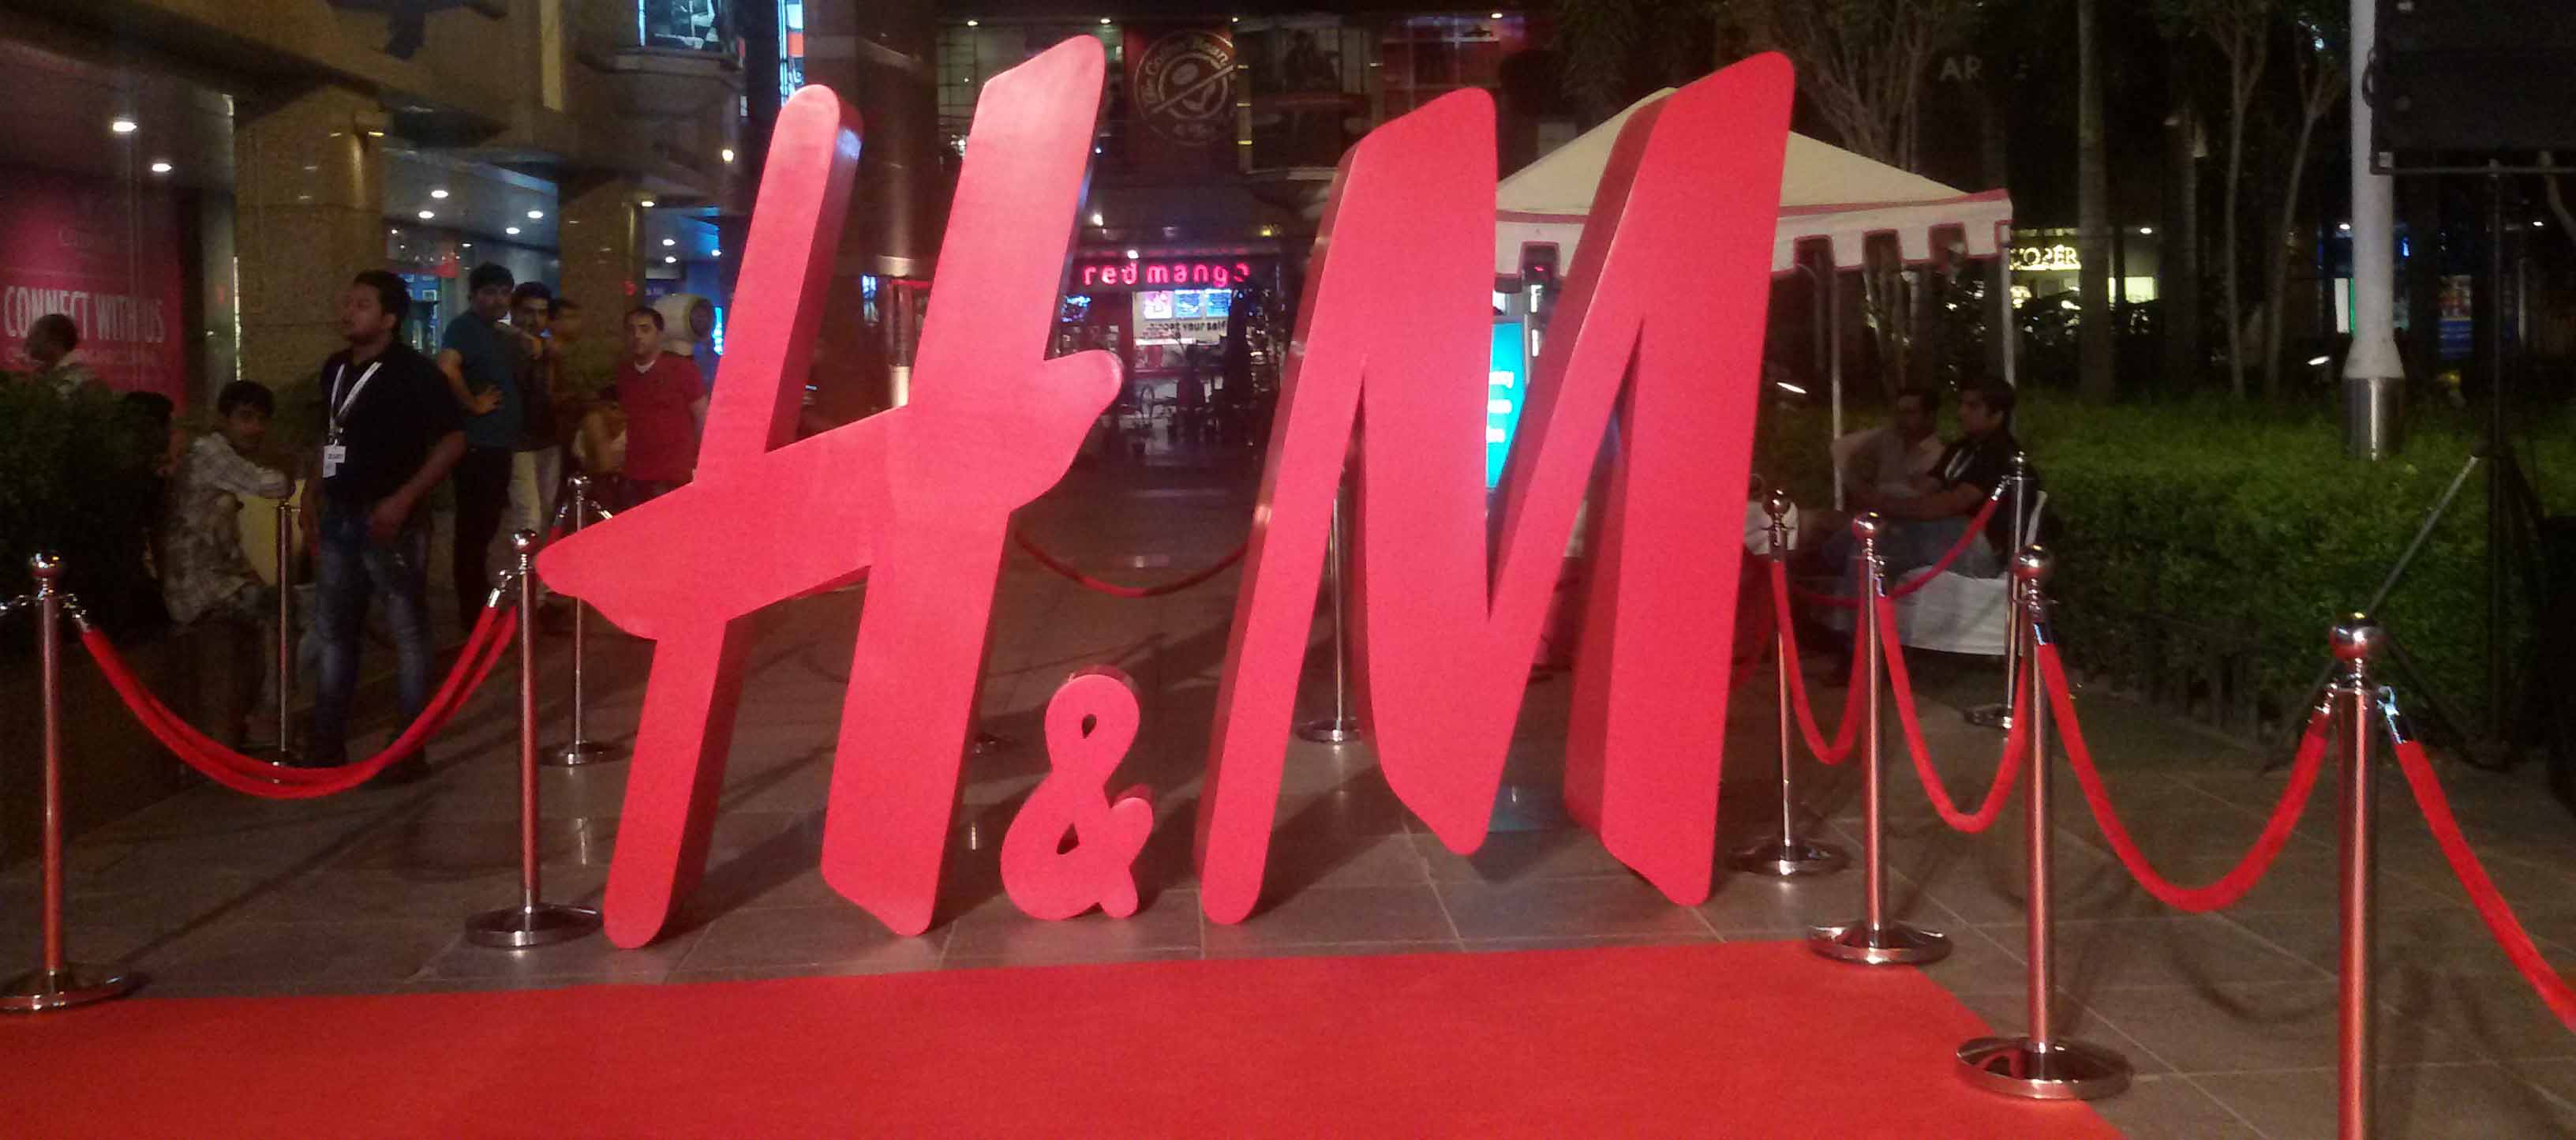 H&M received a red carpet welcome at their first flagship store opening 